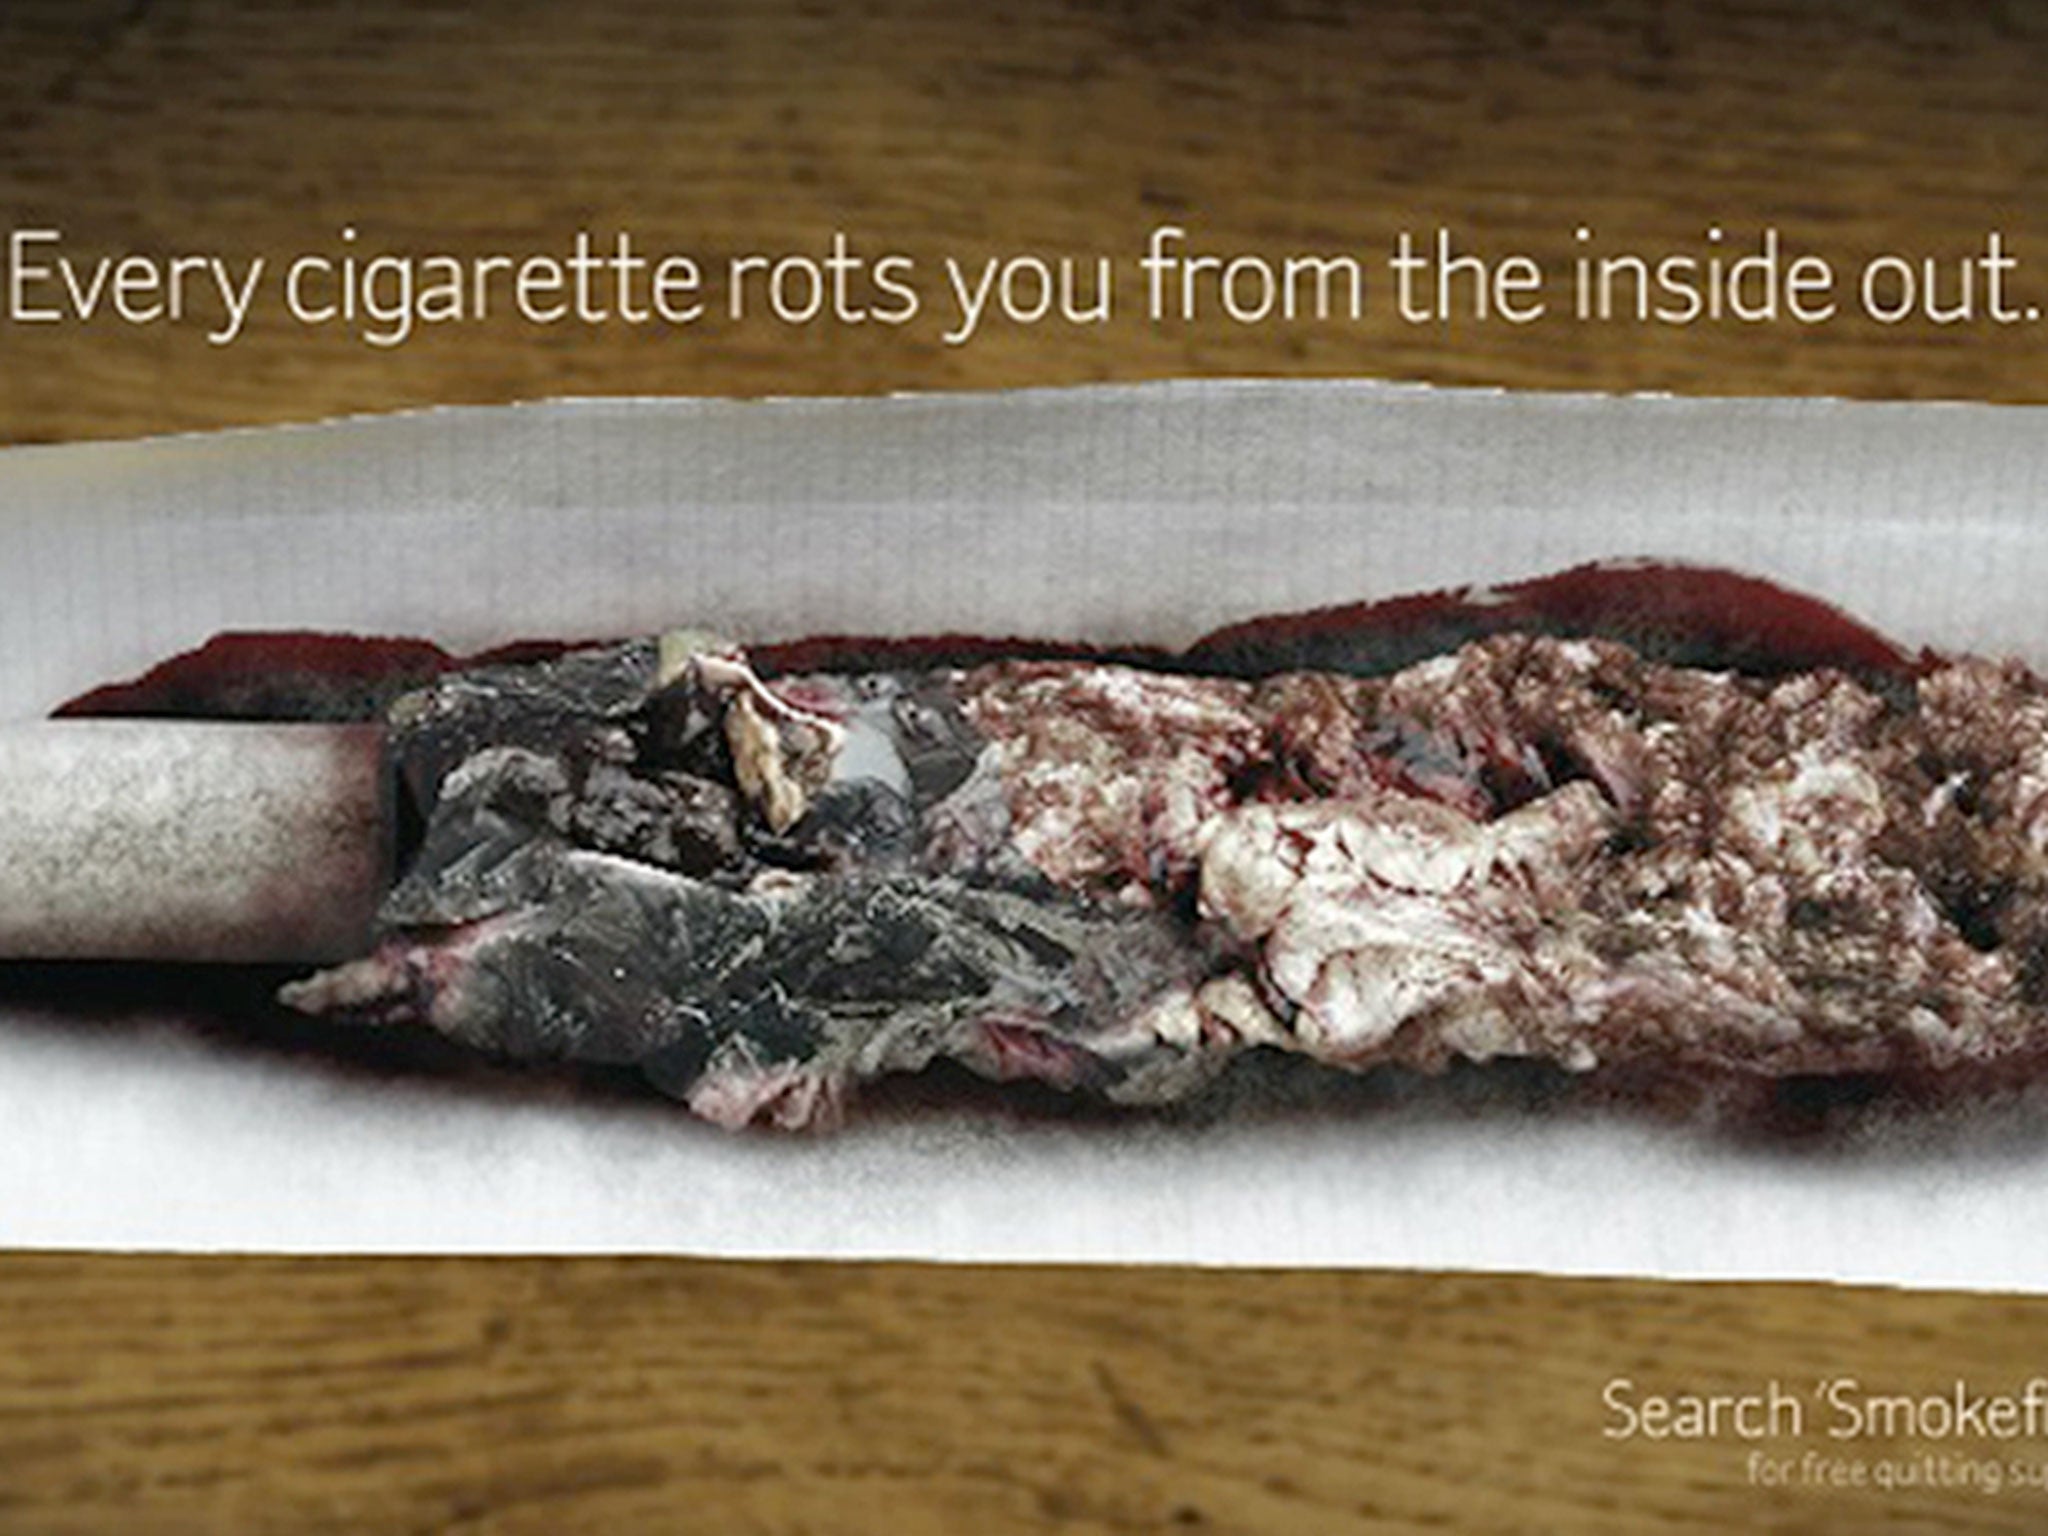 Public Health England’s (PHE) New Year campaign warns smokers that every cigarette “rots you from the inside out” – highlighting the damage that smoking does to muscles, bones, teeth and eyes